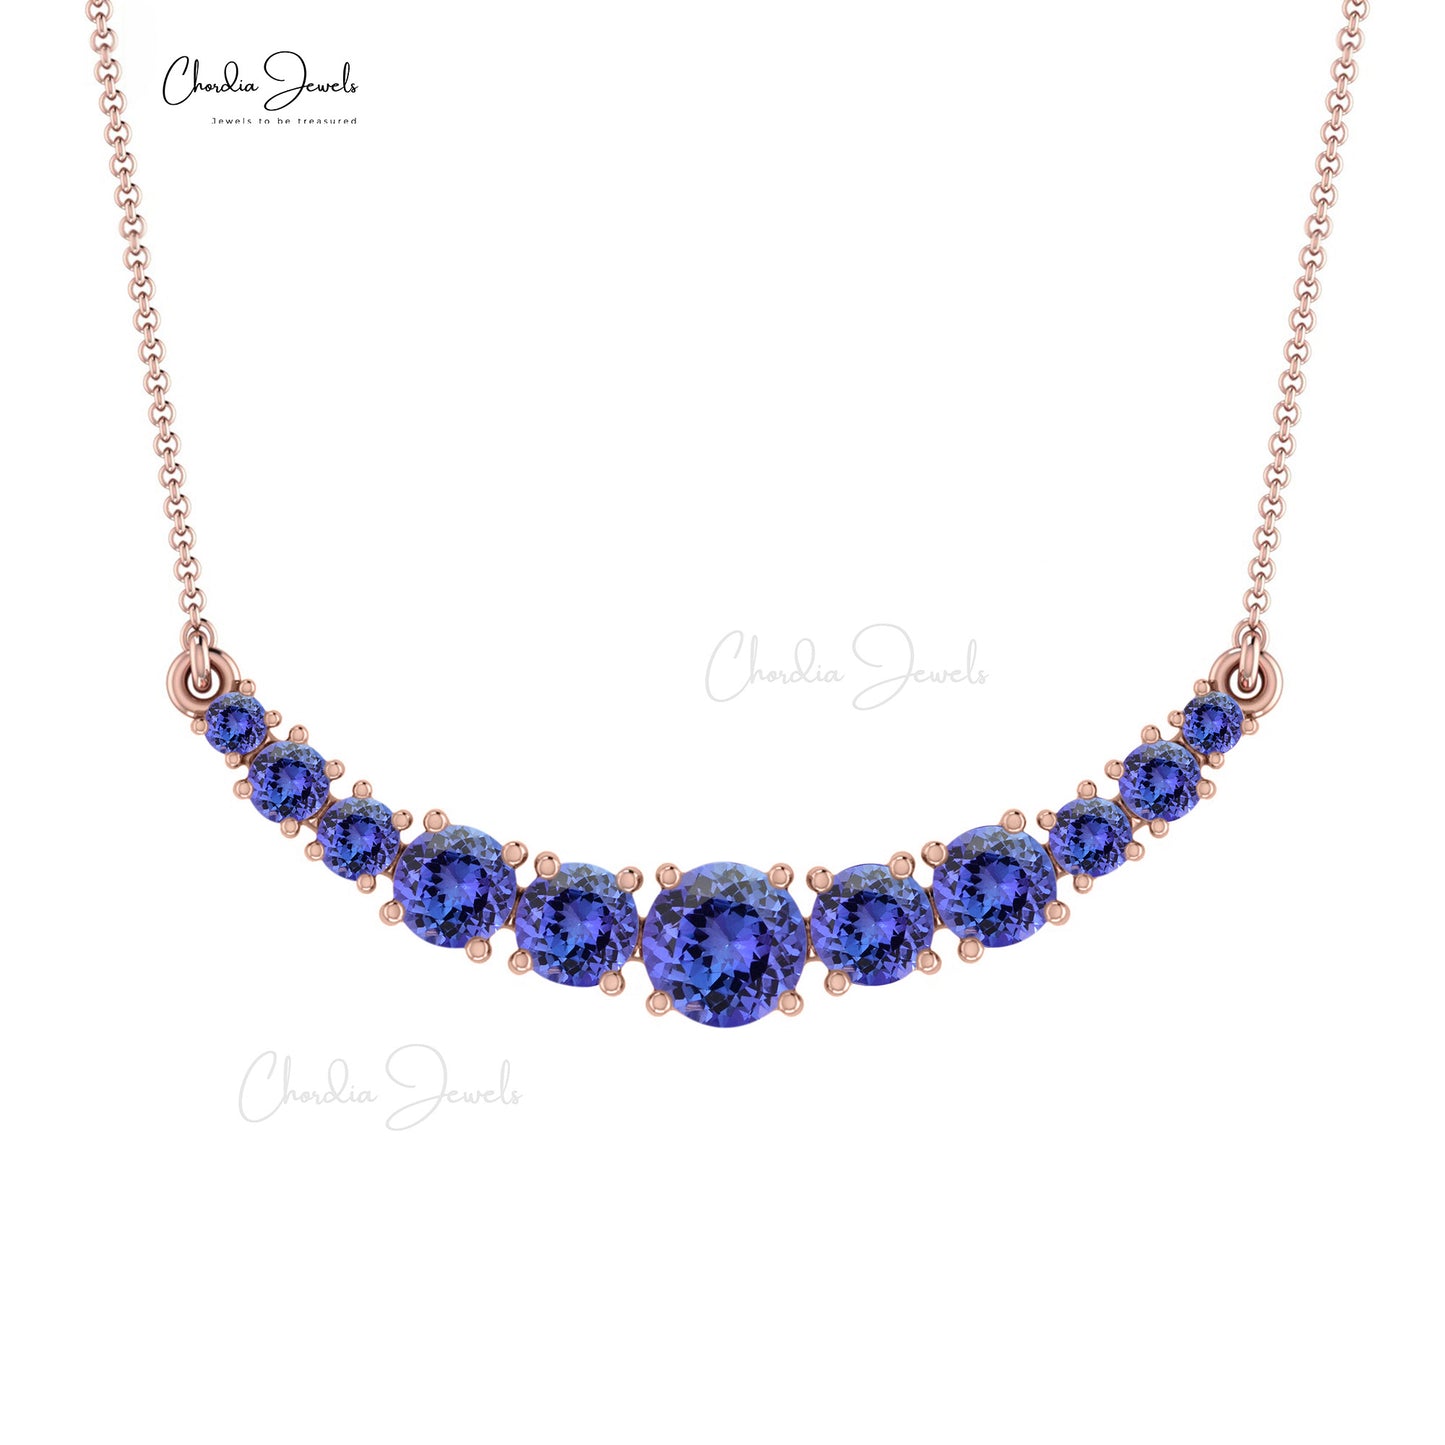 Real 14k Gold December Birthstone Statement Necklace For Her Natural Tanzanite 0.87 Ct 4-Prong Set Gemstone Light Weight Jewelry